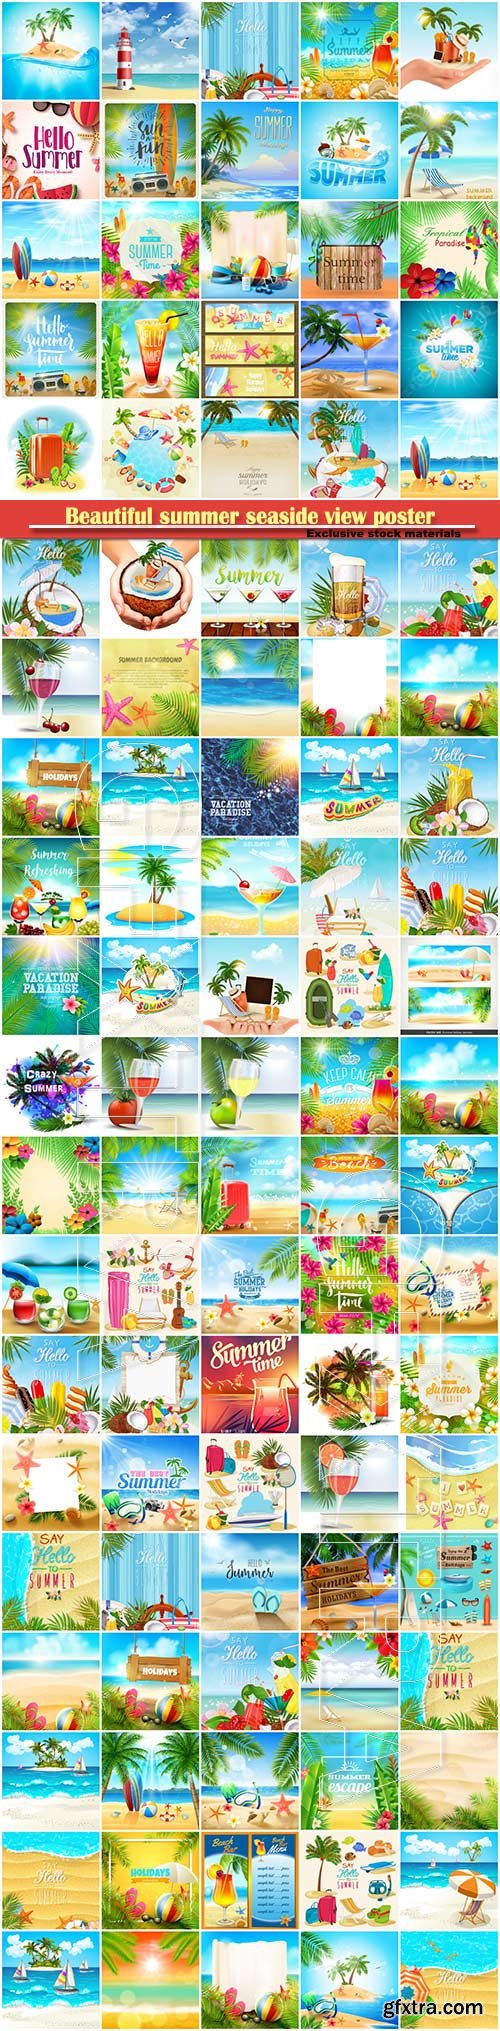 Beautiful summer seaside view poster, tropical sea, travel background vector illustration # 2